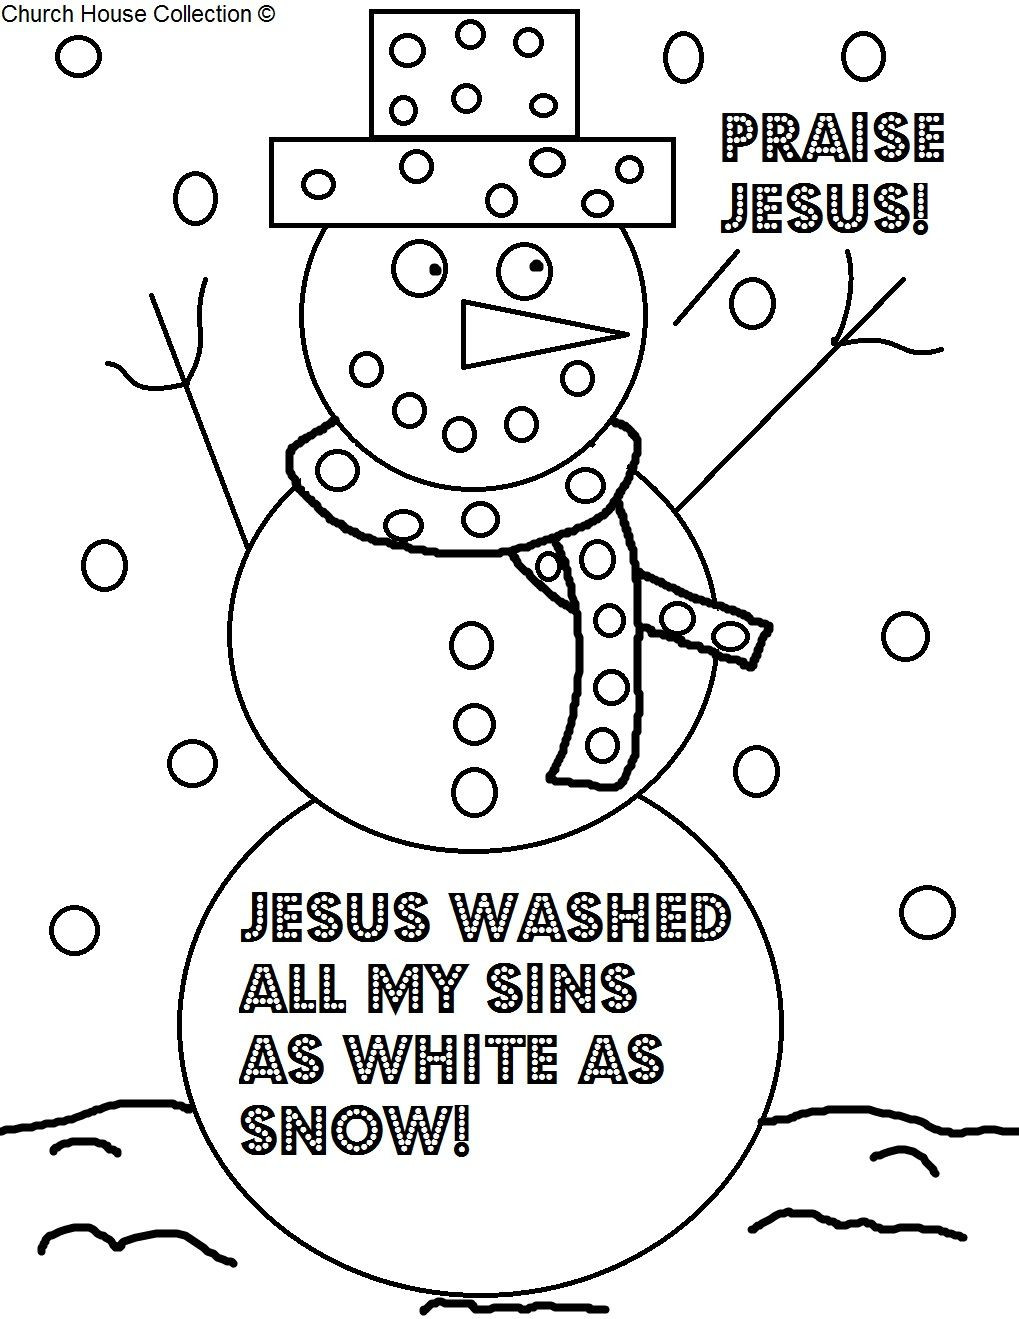 Sunday School Coloring Pages For Toddlers
 Church House Collection Blog Christmas Coloring Page For